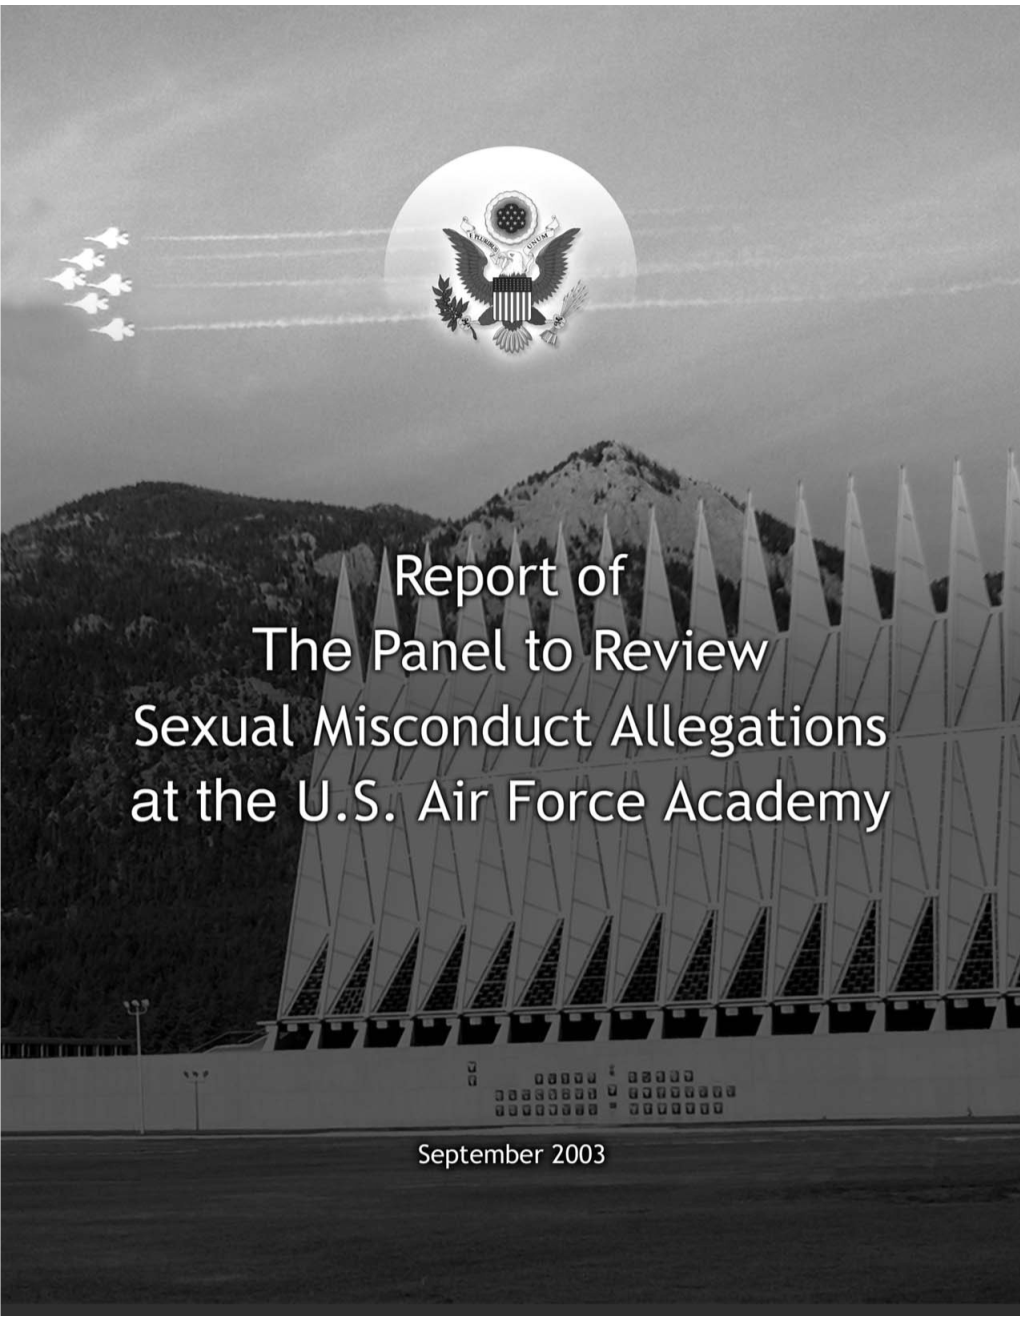 Report of the Panel to Review Sexual Misconduct Allegations at the U.S. Air Force Academy